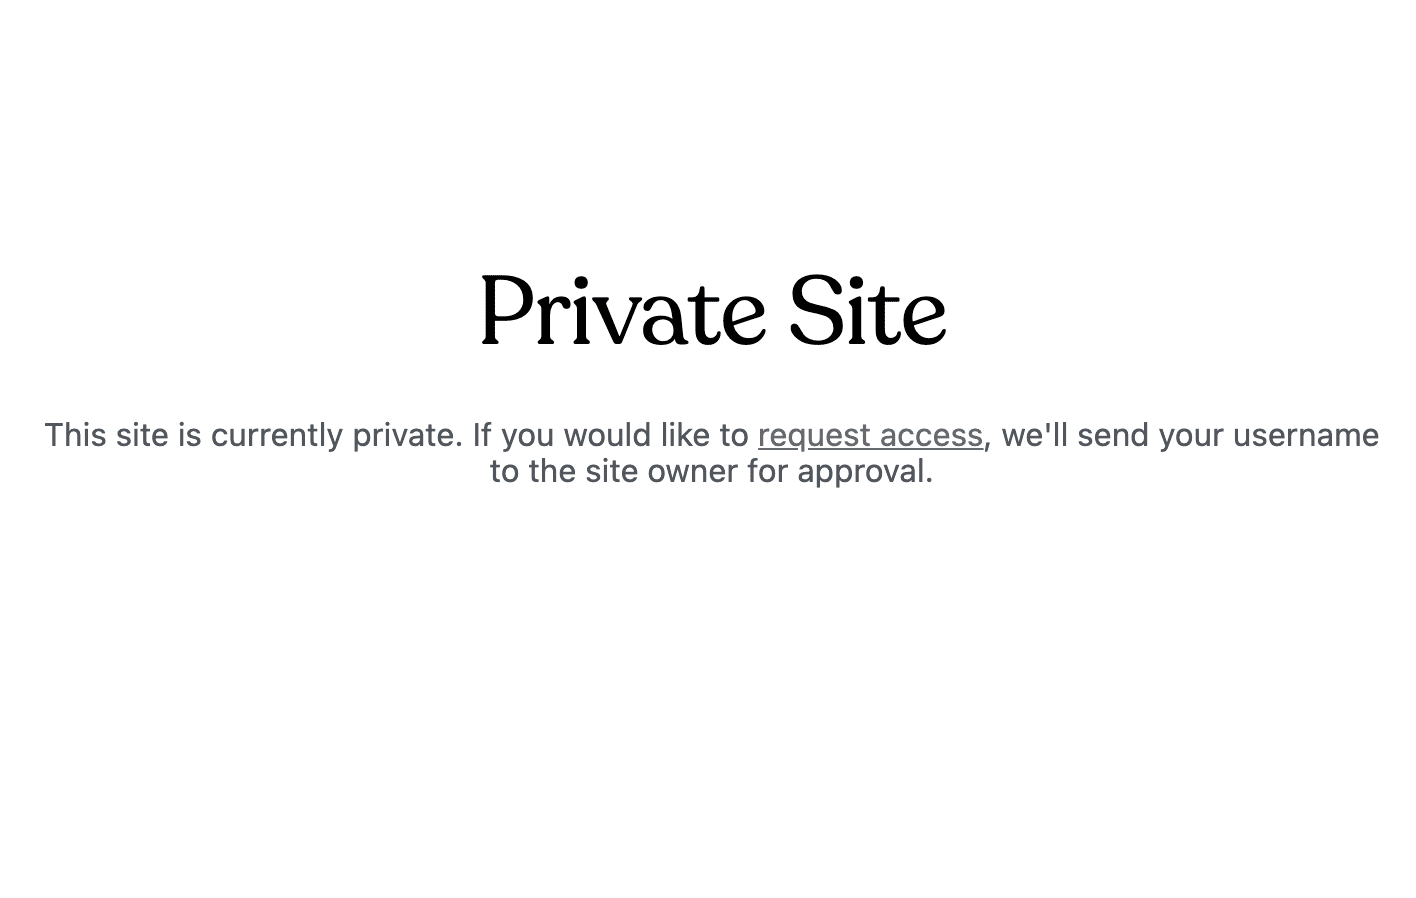 Private Site message displayed on sites set as private